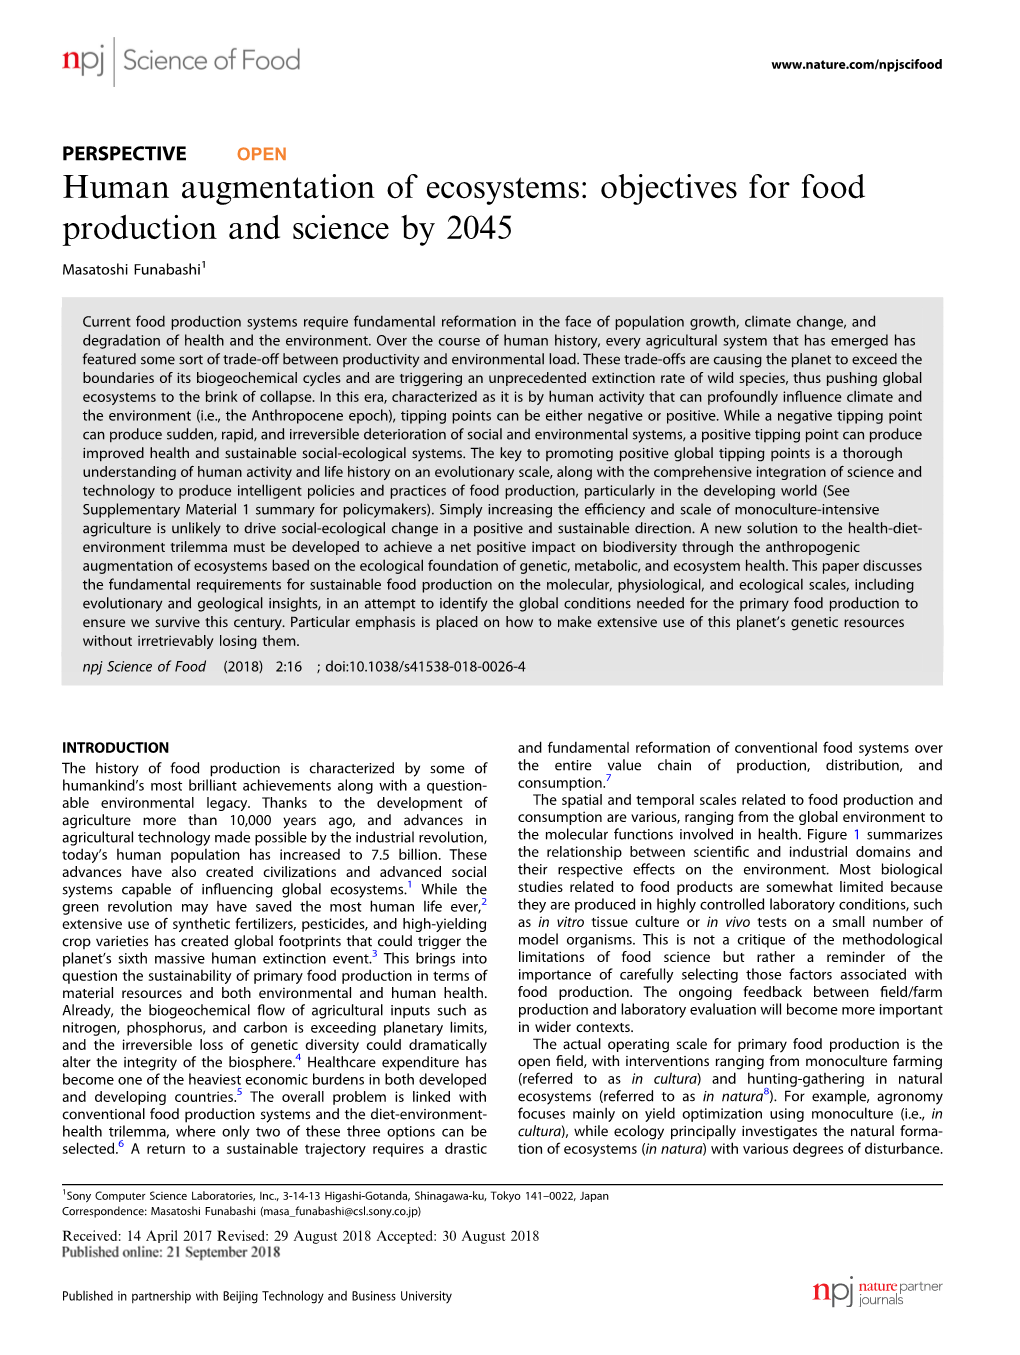 Human Augmentation of Ecosystems: Objectives for Food Production and Science by 2045